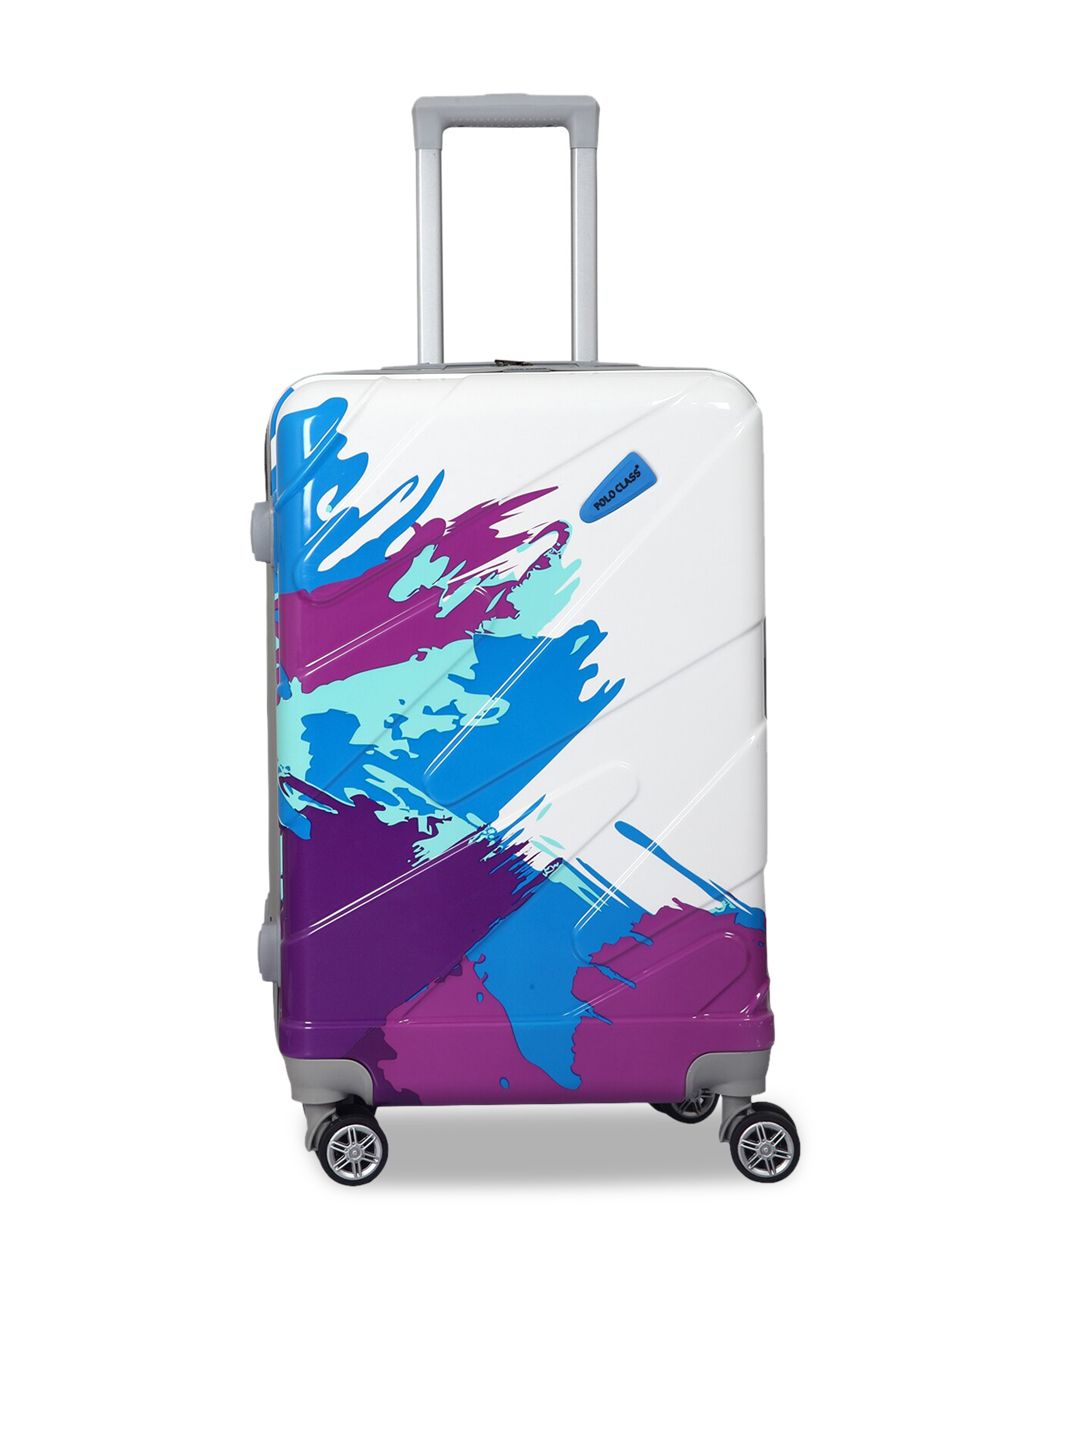 Polo Class Blue & White Printed Hard-Sided Large Trolley Suitcase Price in India